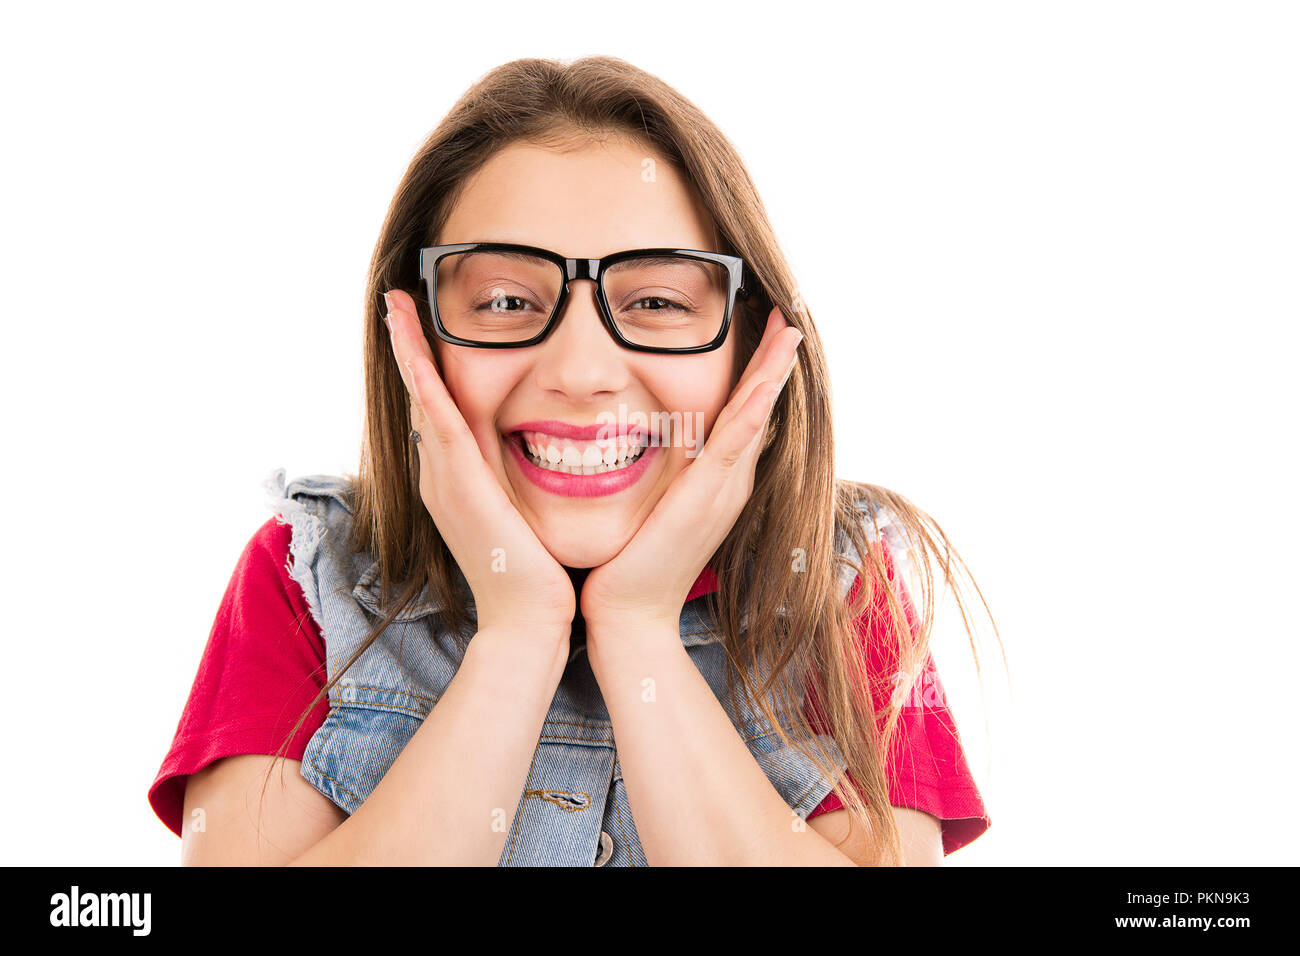 Happy young cool woman in glasses touching cheeks in excitement looking at camera isolated on white background Stock Photo